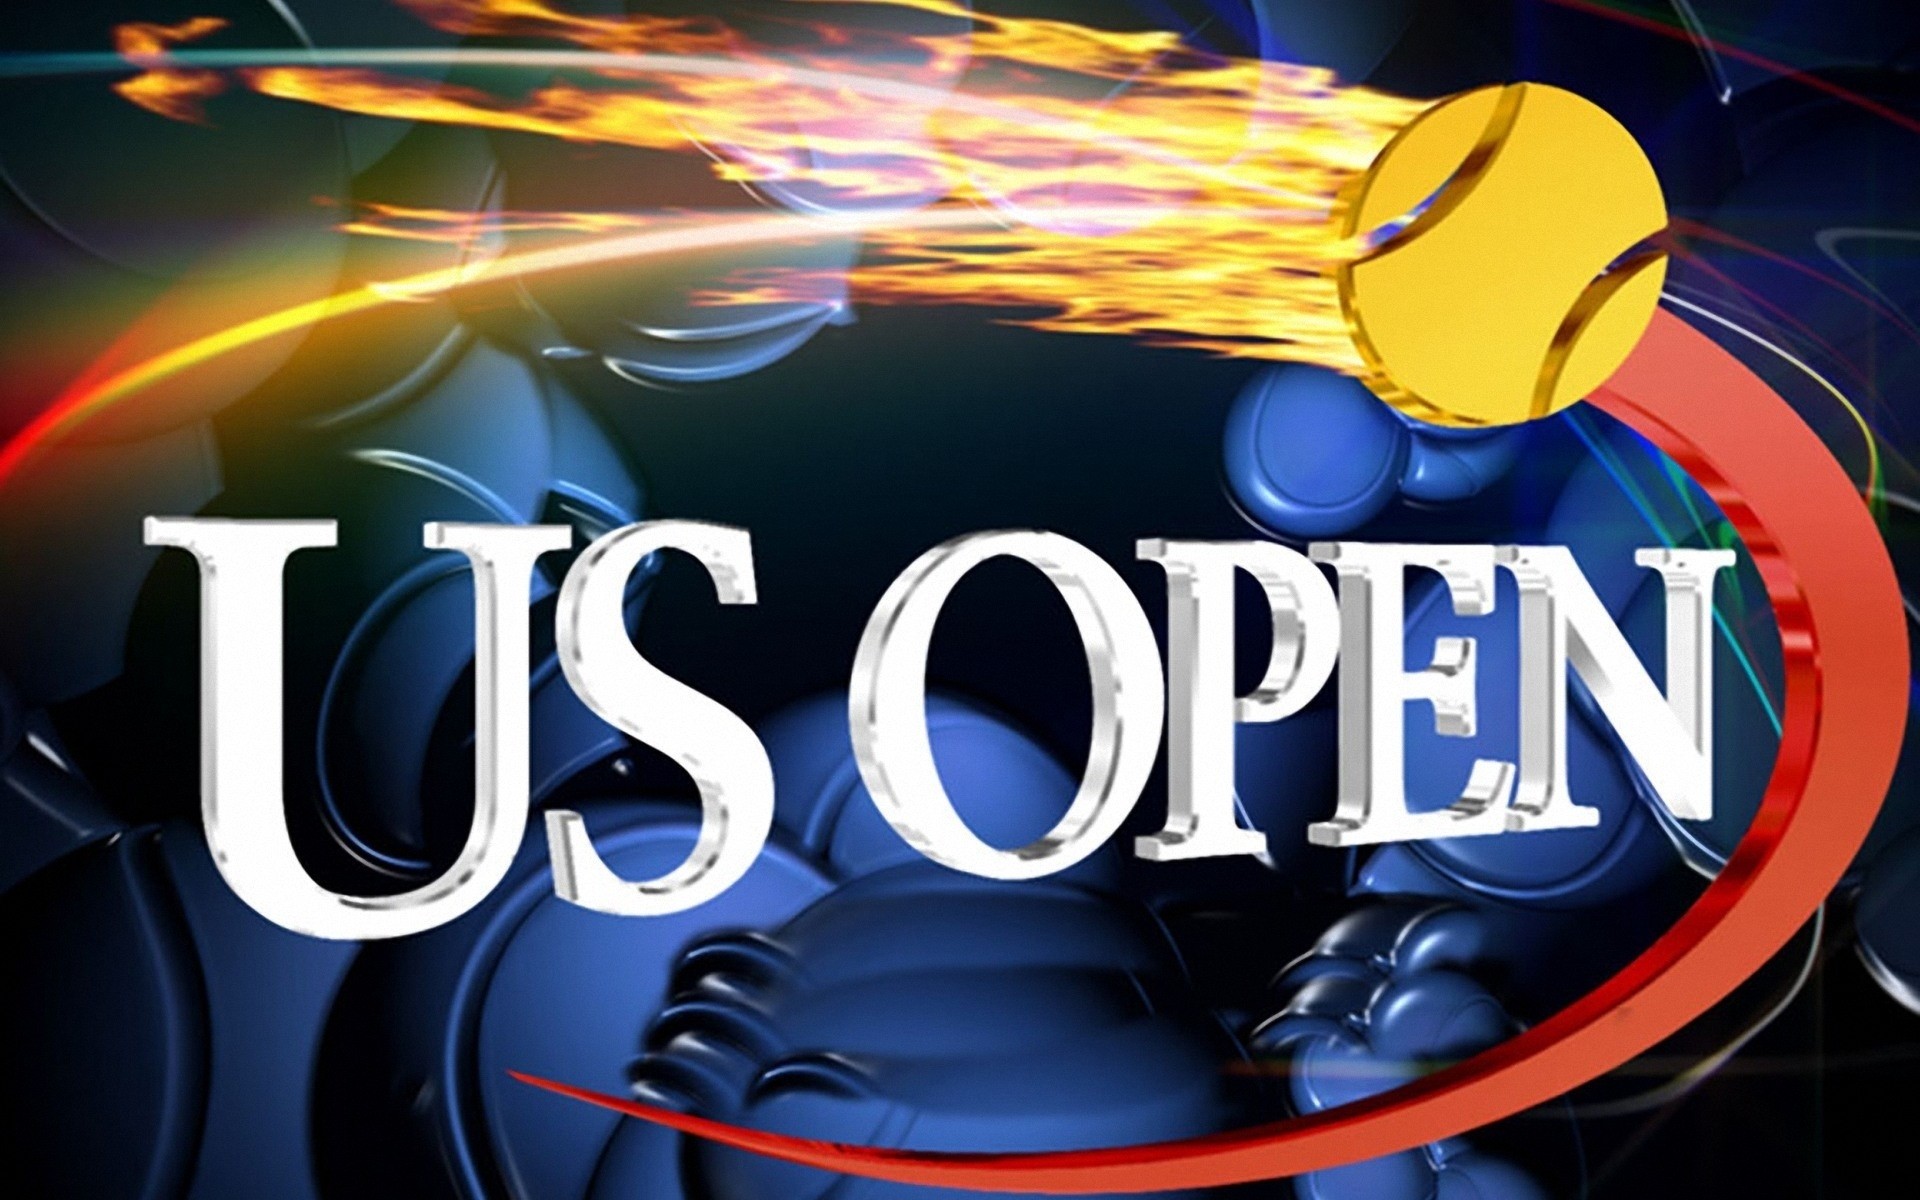 US Open Tennis Championship Tickets | Shop for US Open Tennis Championship Tennis - Professional